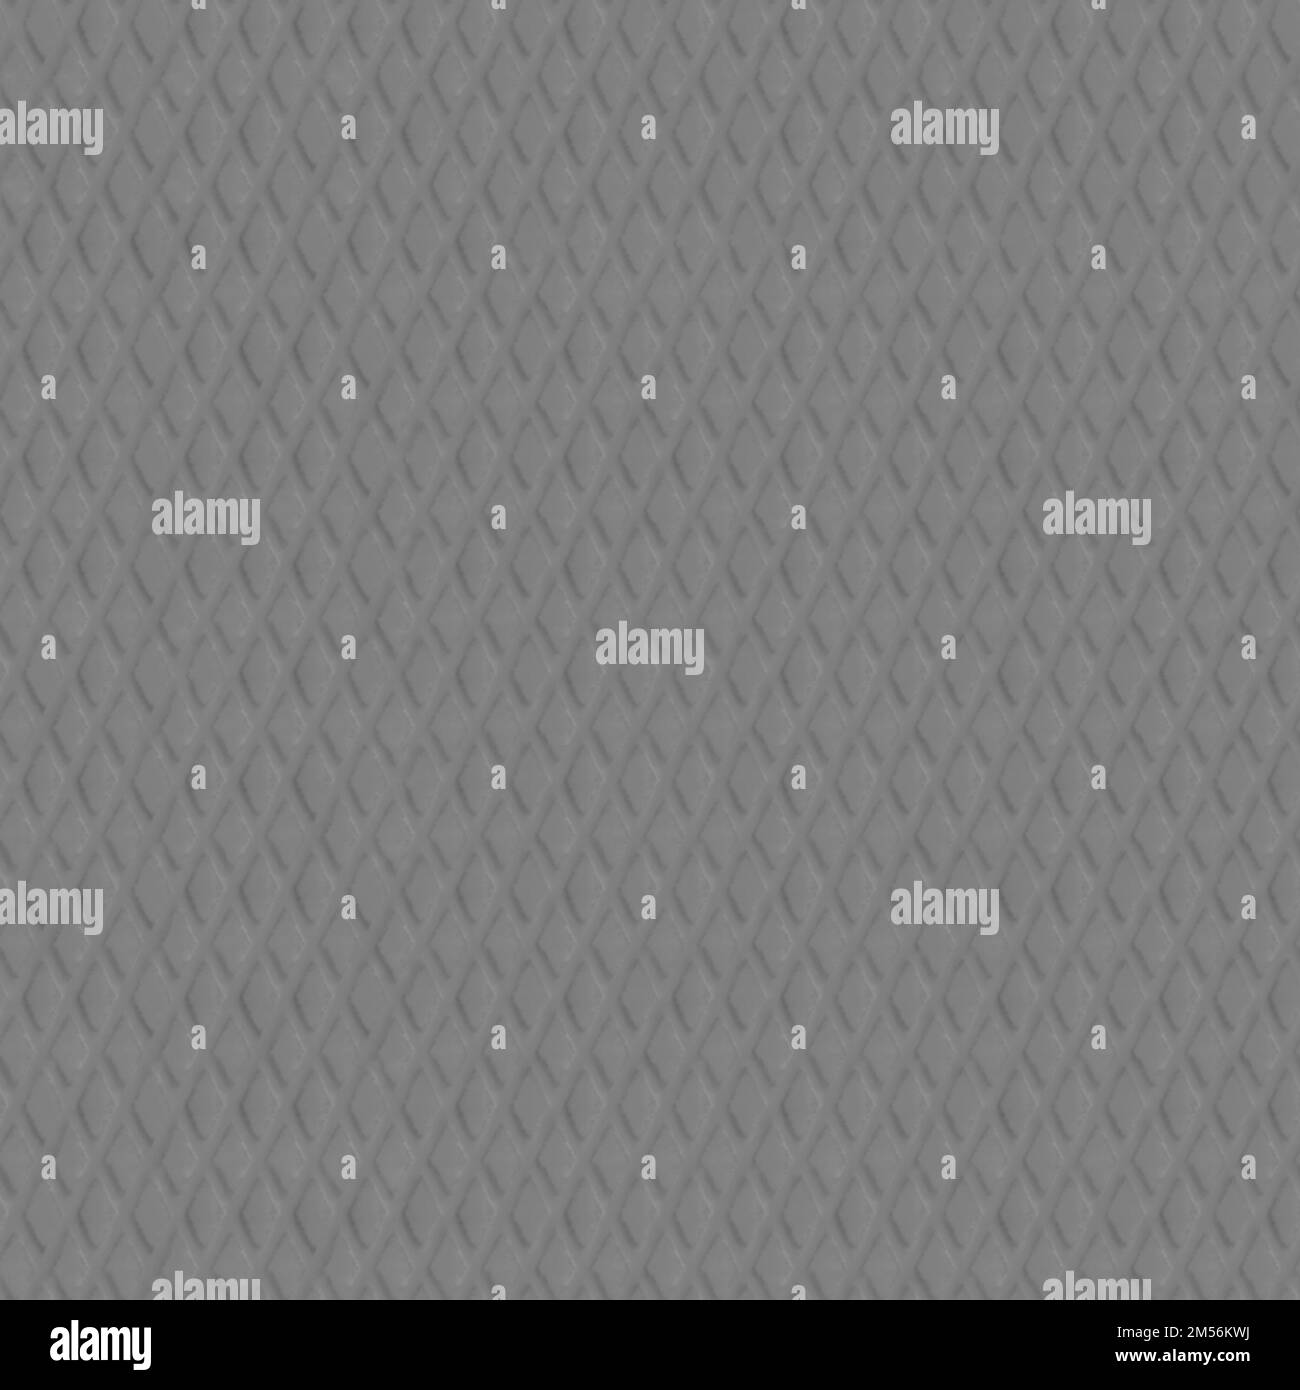 Bump map texture rusty metal, height texture mapping Stock Photo